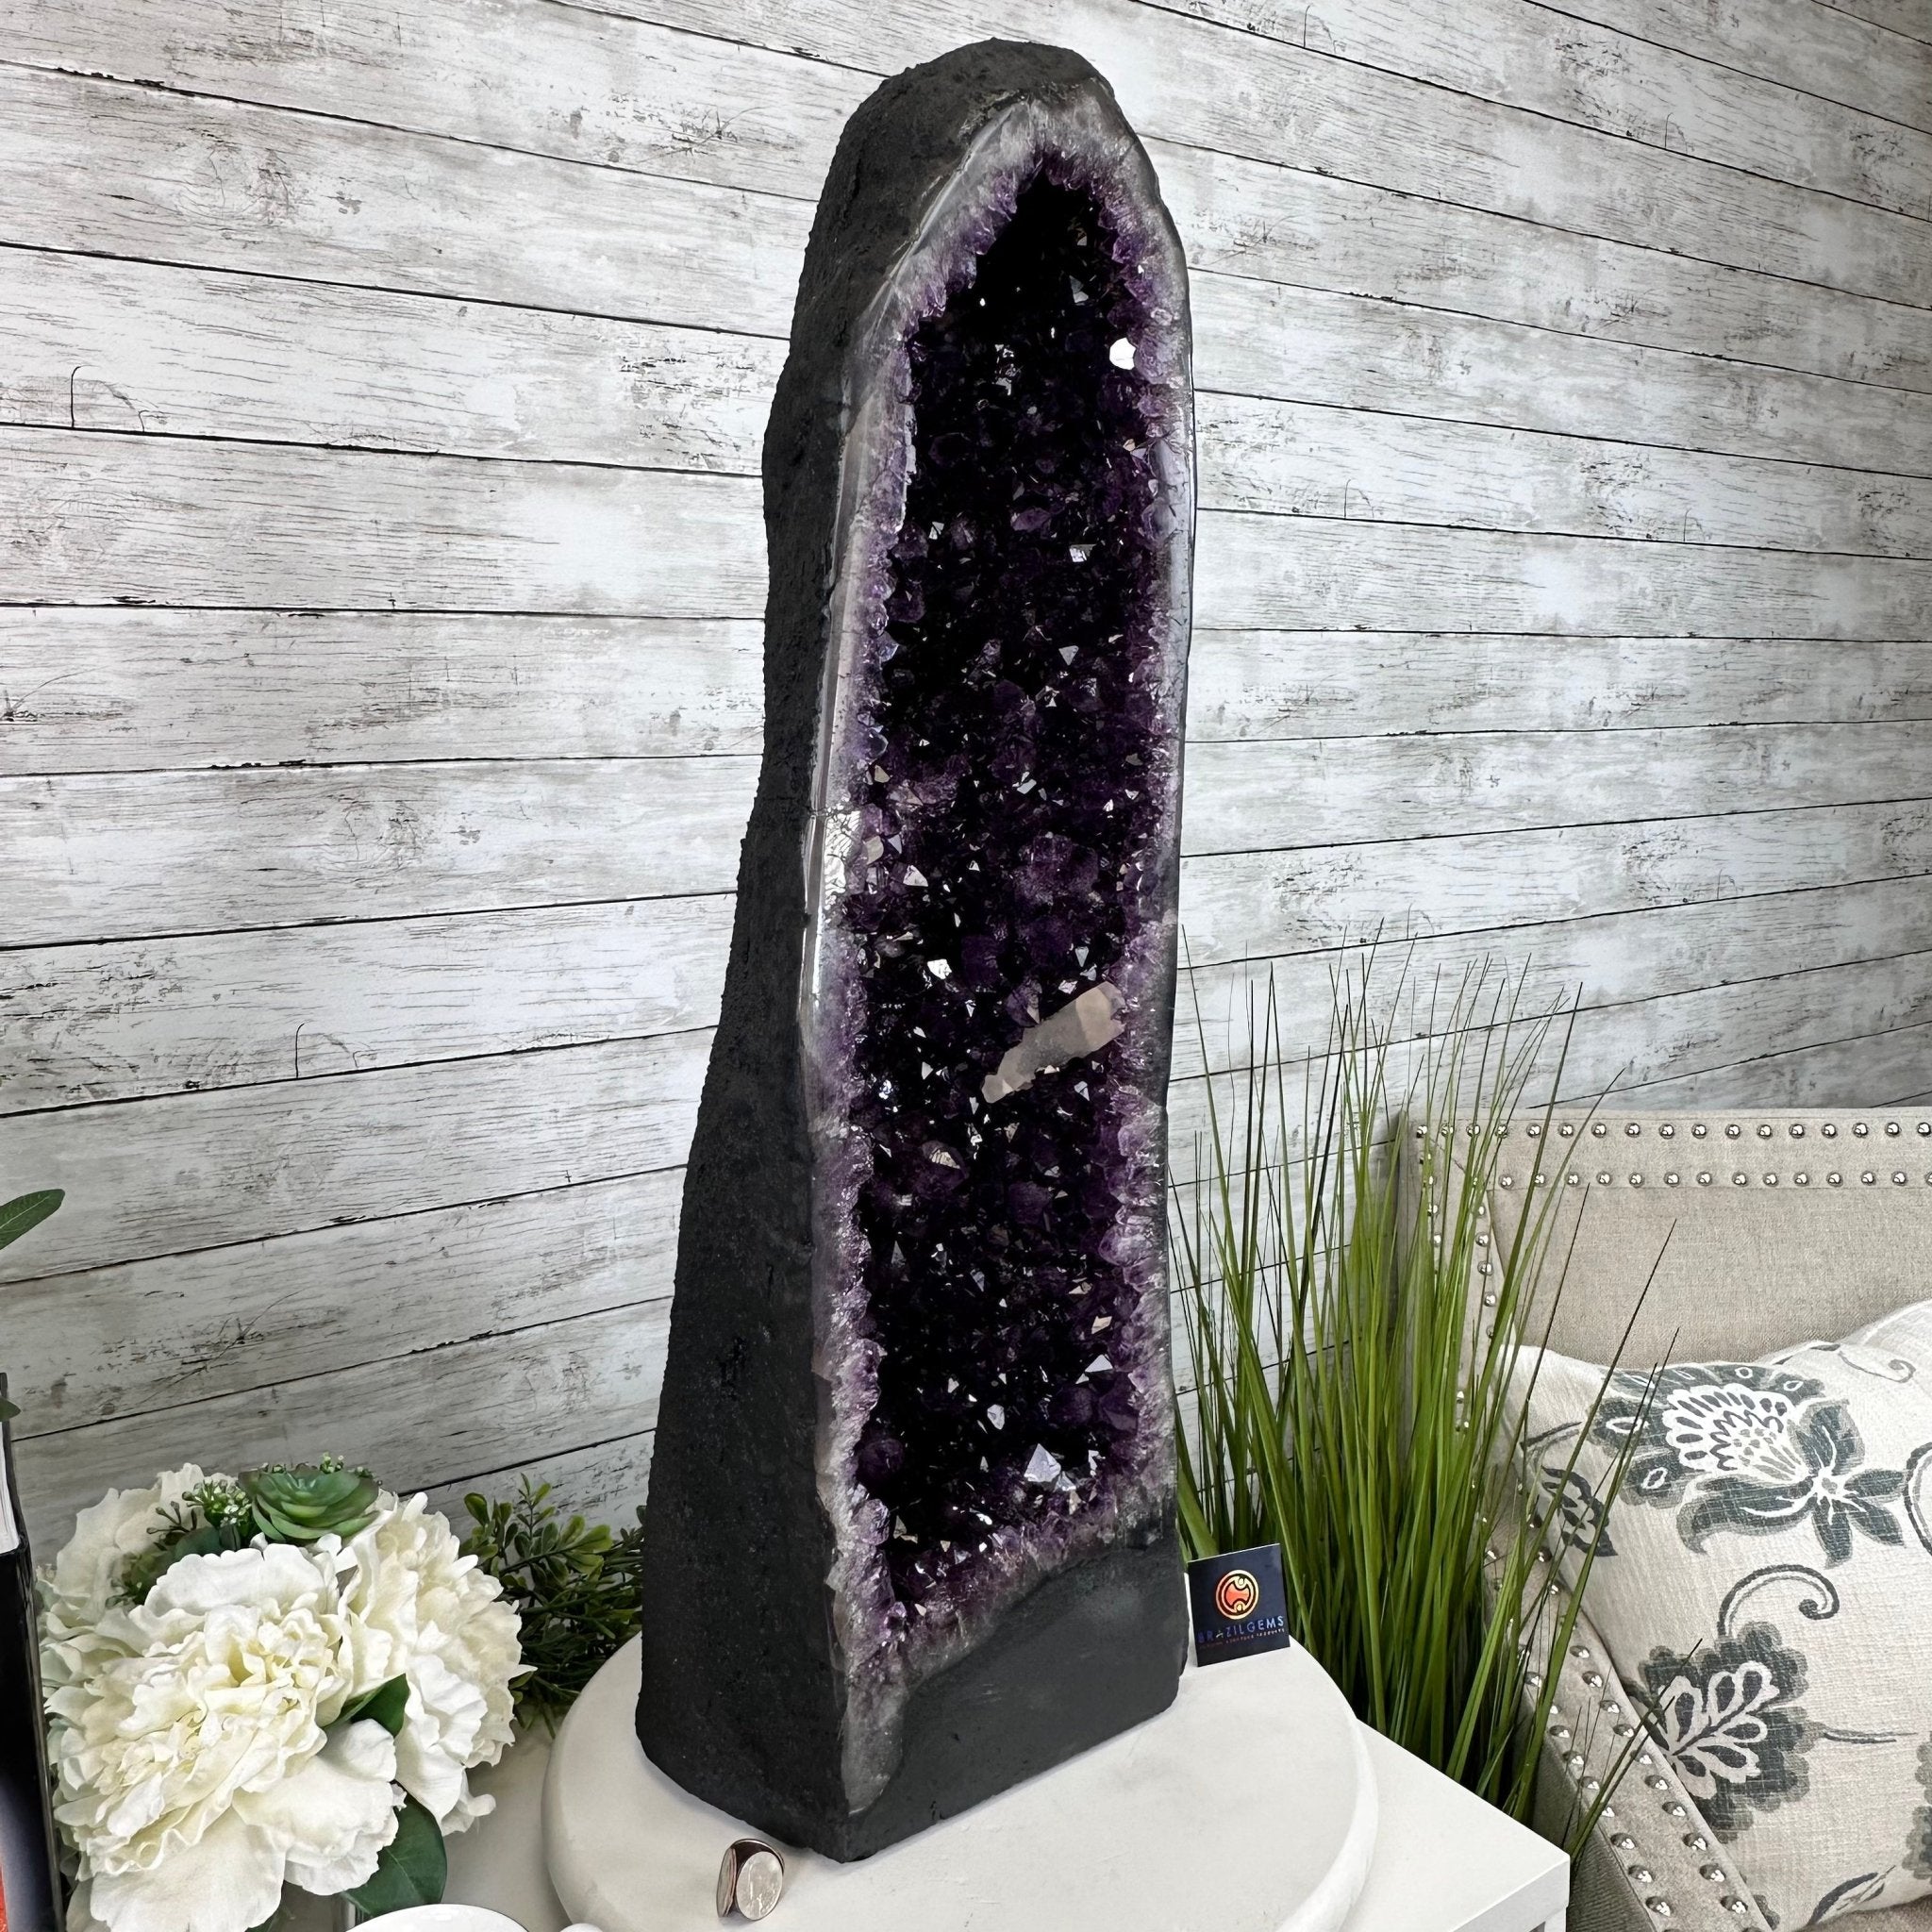 Extra Plus Quality Brazilian Amethyst Cathedral, 60.7 lbs & 29.5" Tall, Model #5601-1294 by Brazil Gems - Brazil GemsBrazil GemsExtra Plus Quality Brazilian Amethyst Cathedral, 60.7 lbs & 29.5" Tall, Model #5601-1294 by Brazil GemsCathedrals5601-1294